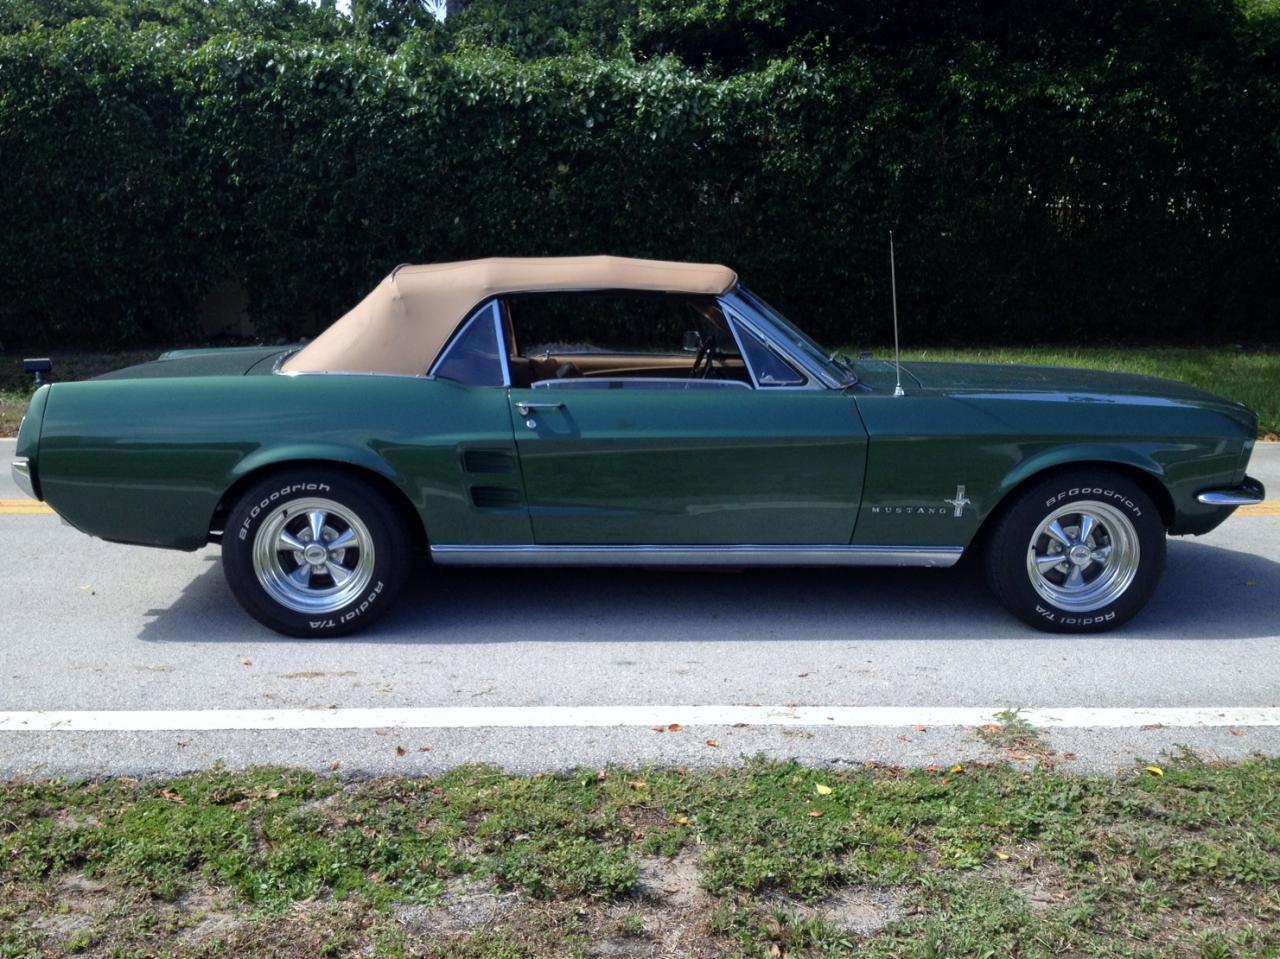 1967 Ford mustang convertible for sale in florida #2